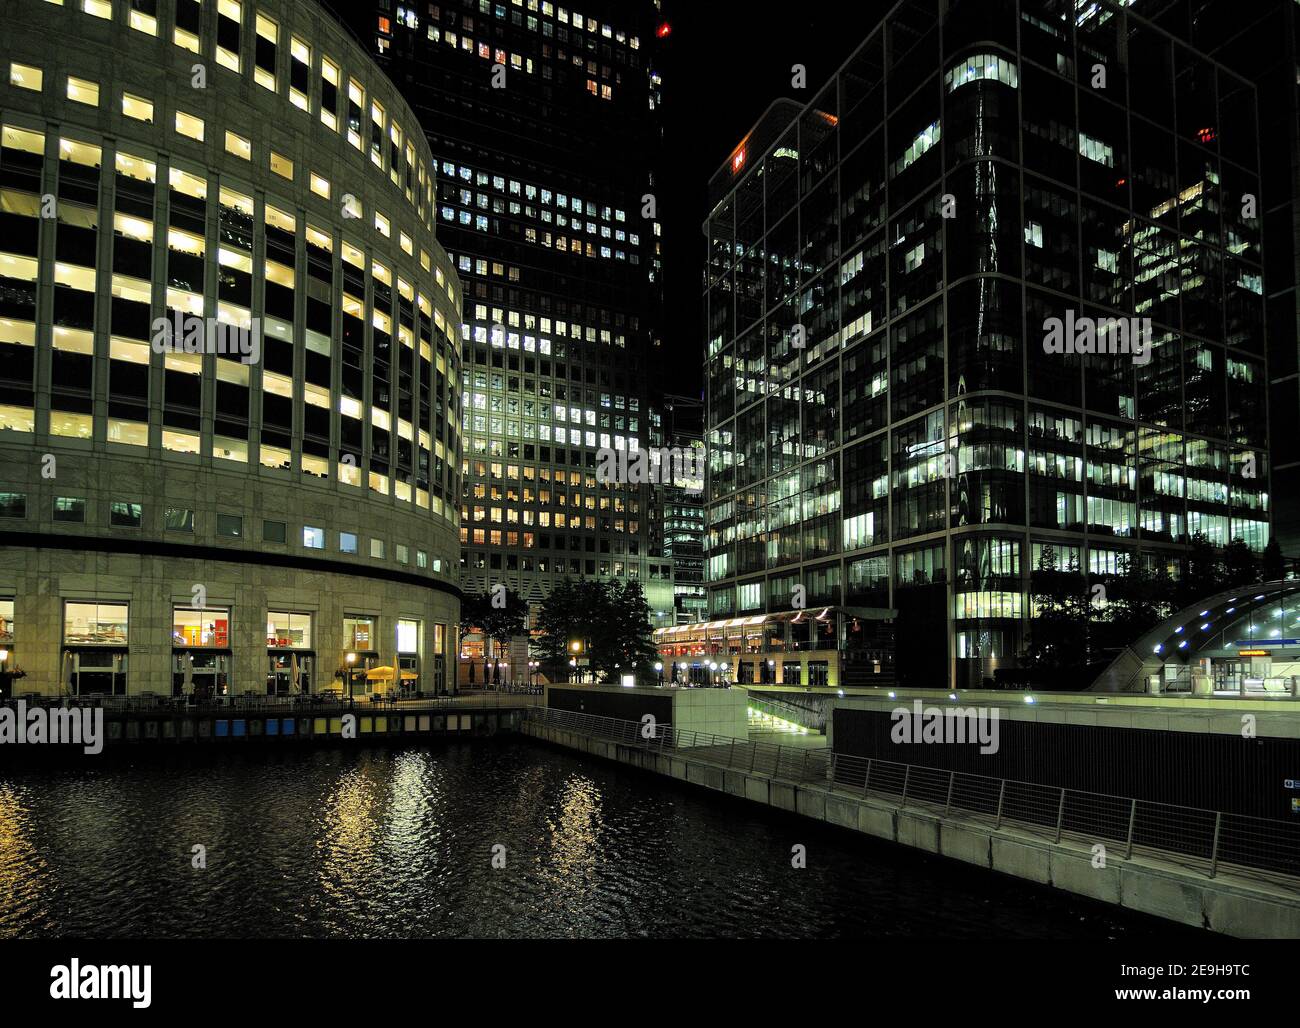 View From Bank Street To The Brightly Lit Bank Towers At Reuters Plaza In Canary Wharf London England At Night Stock Photo